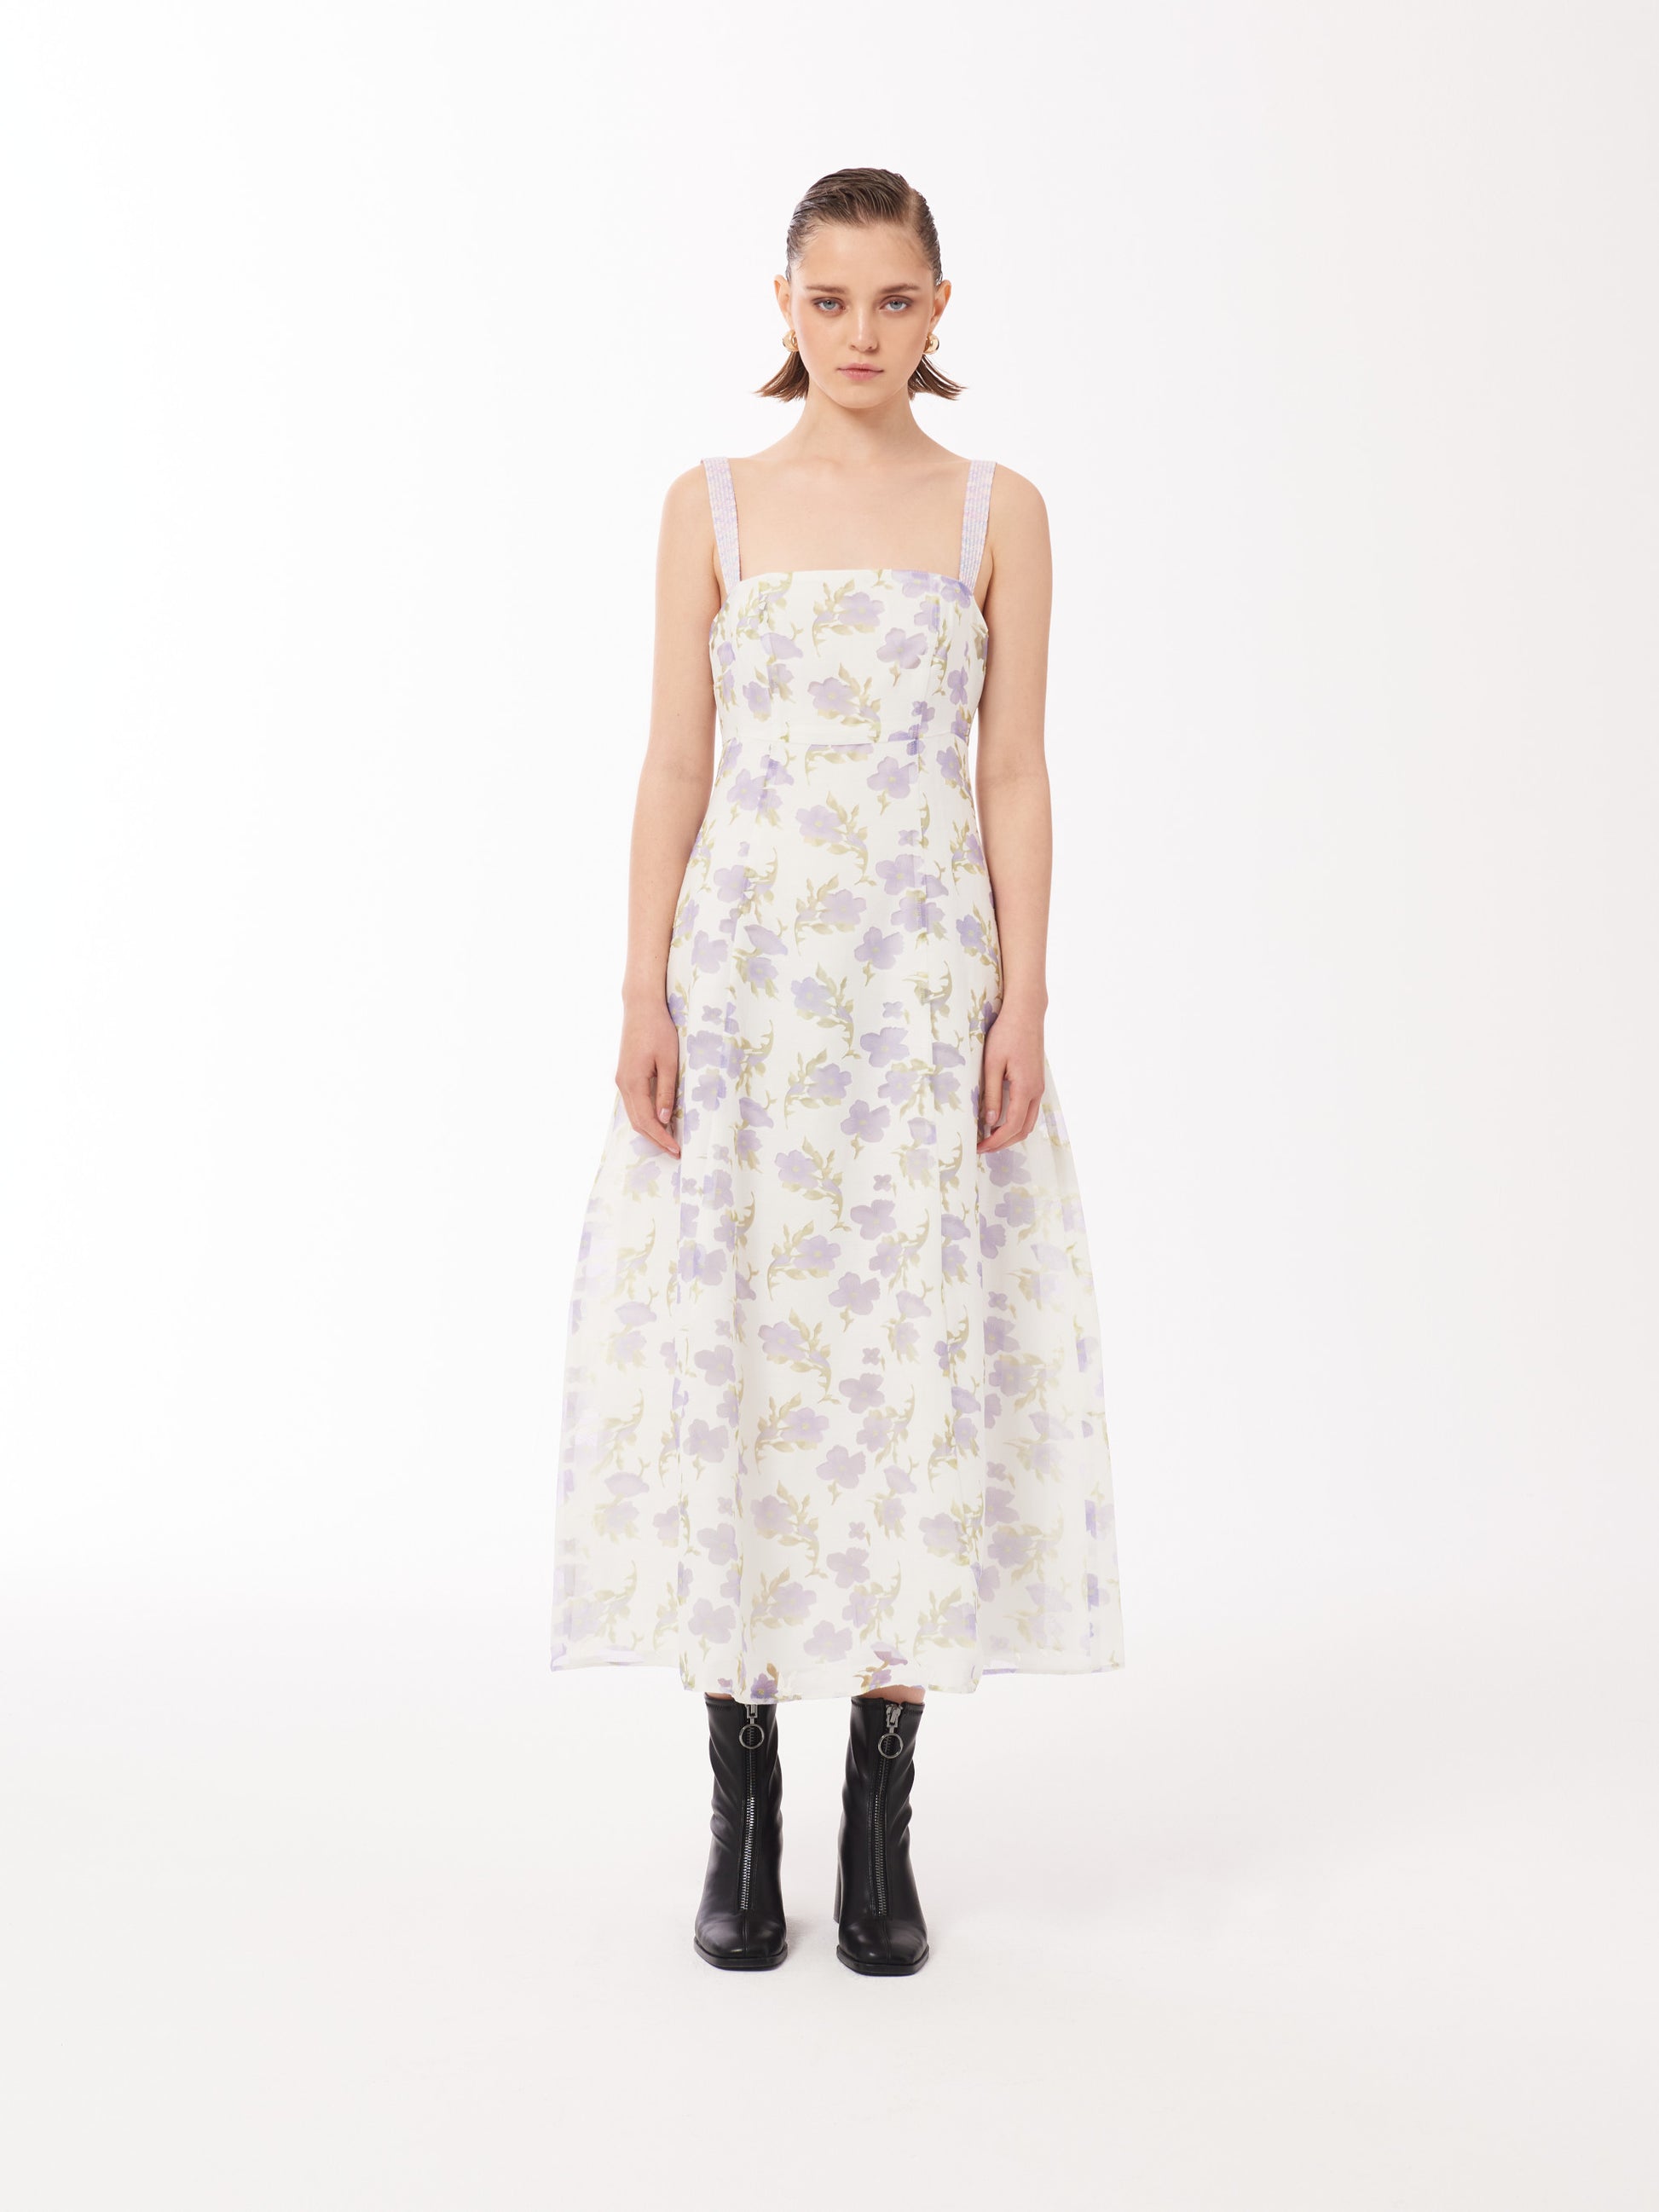 Floral print Midi Dress in White and Lilac allover print